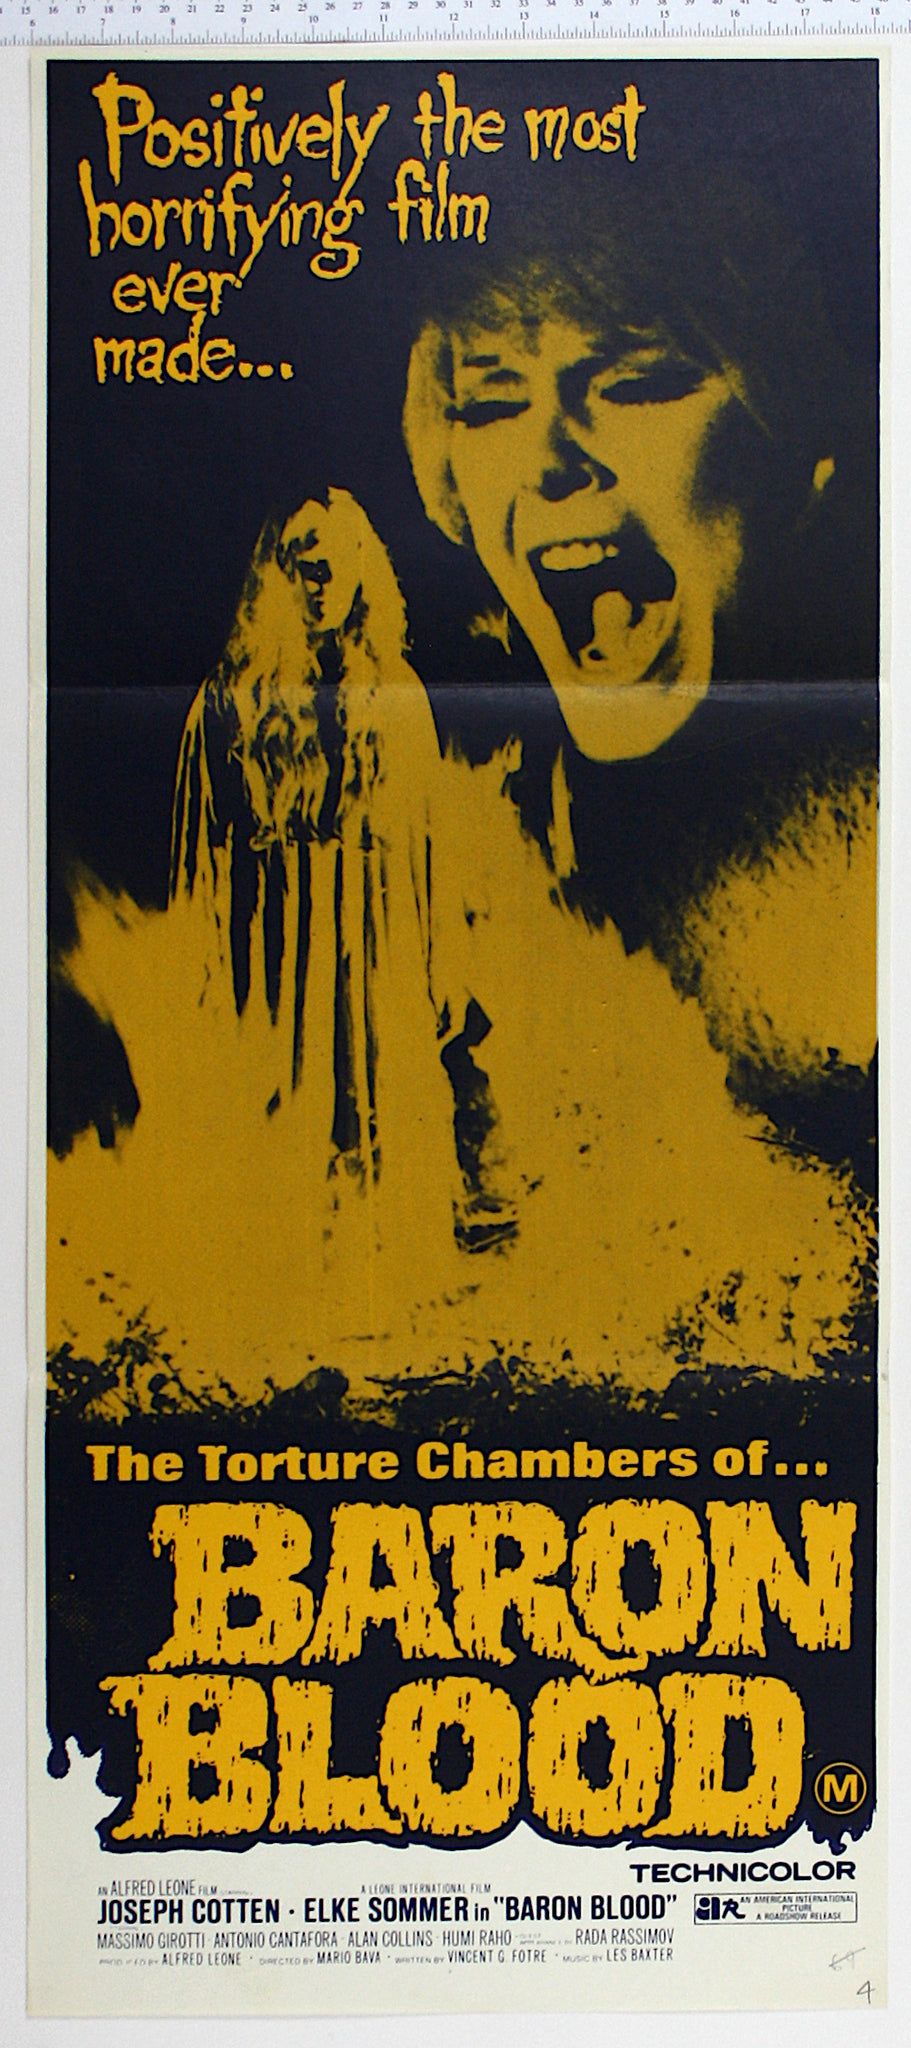 Artwork in yellow and black, with Sommer screaming in close up and spectral woman in nightgown being consumed by fire